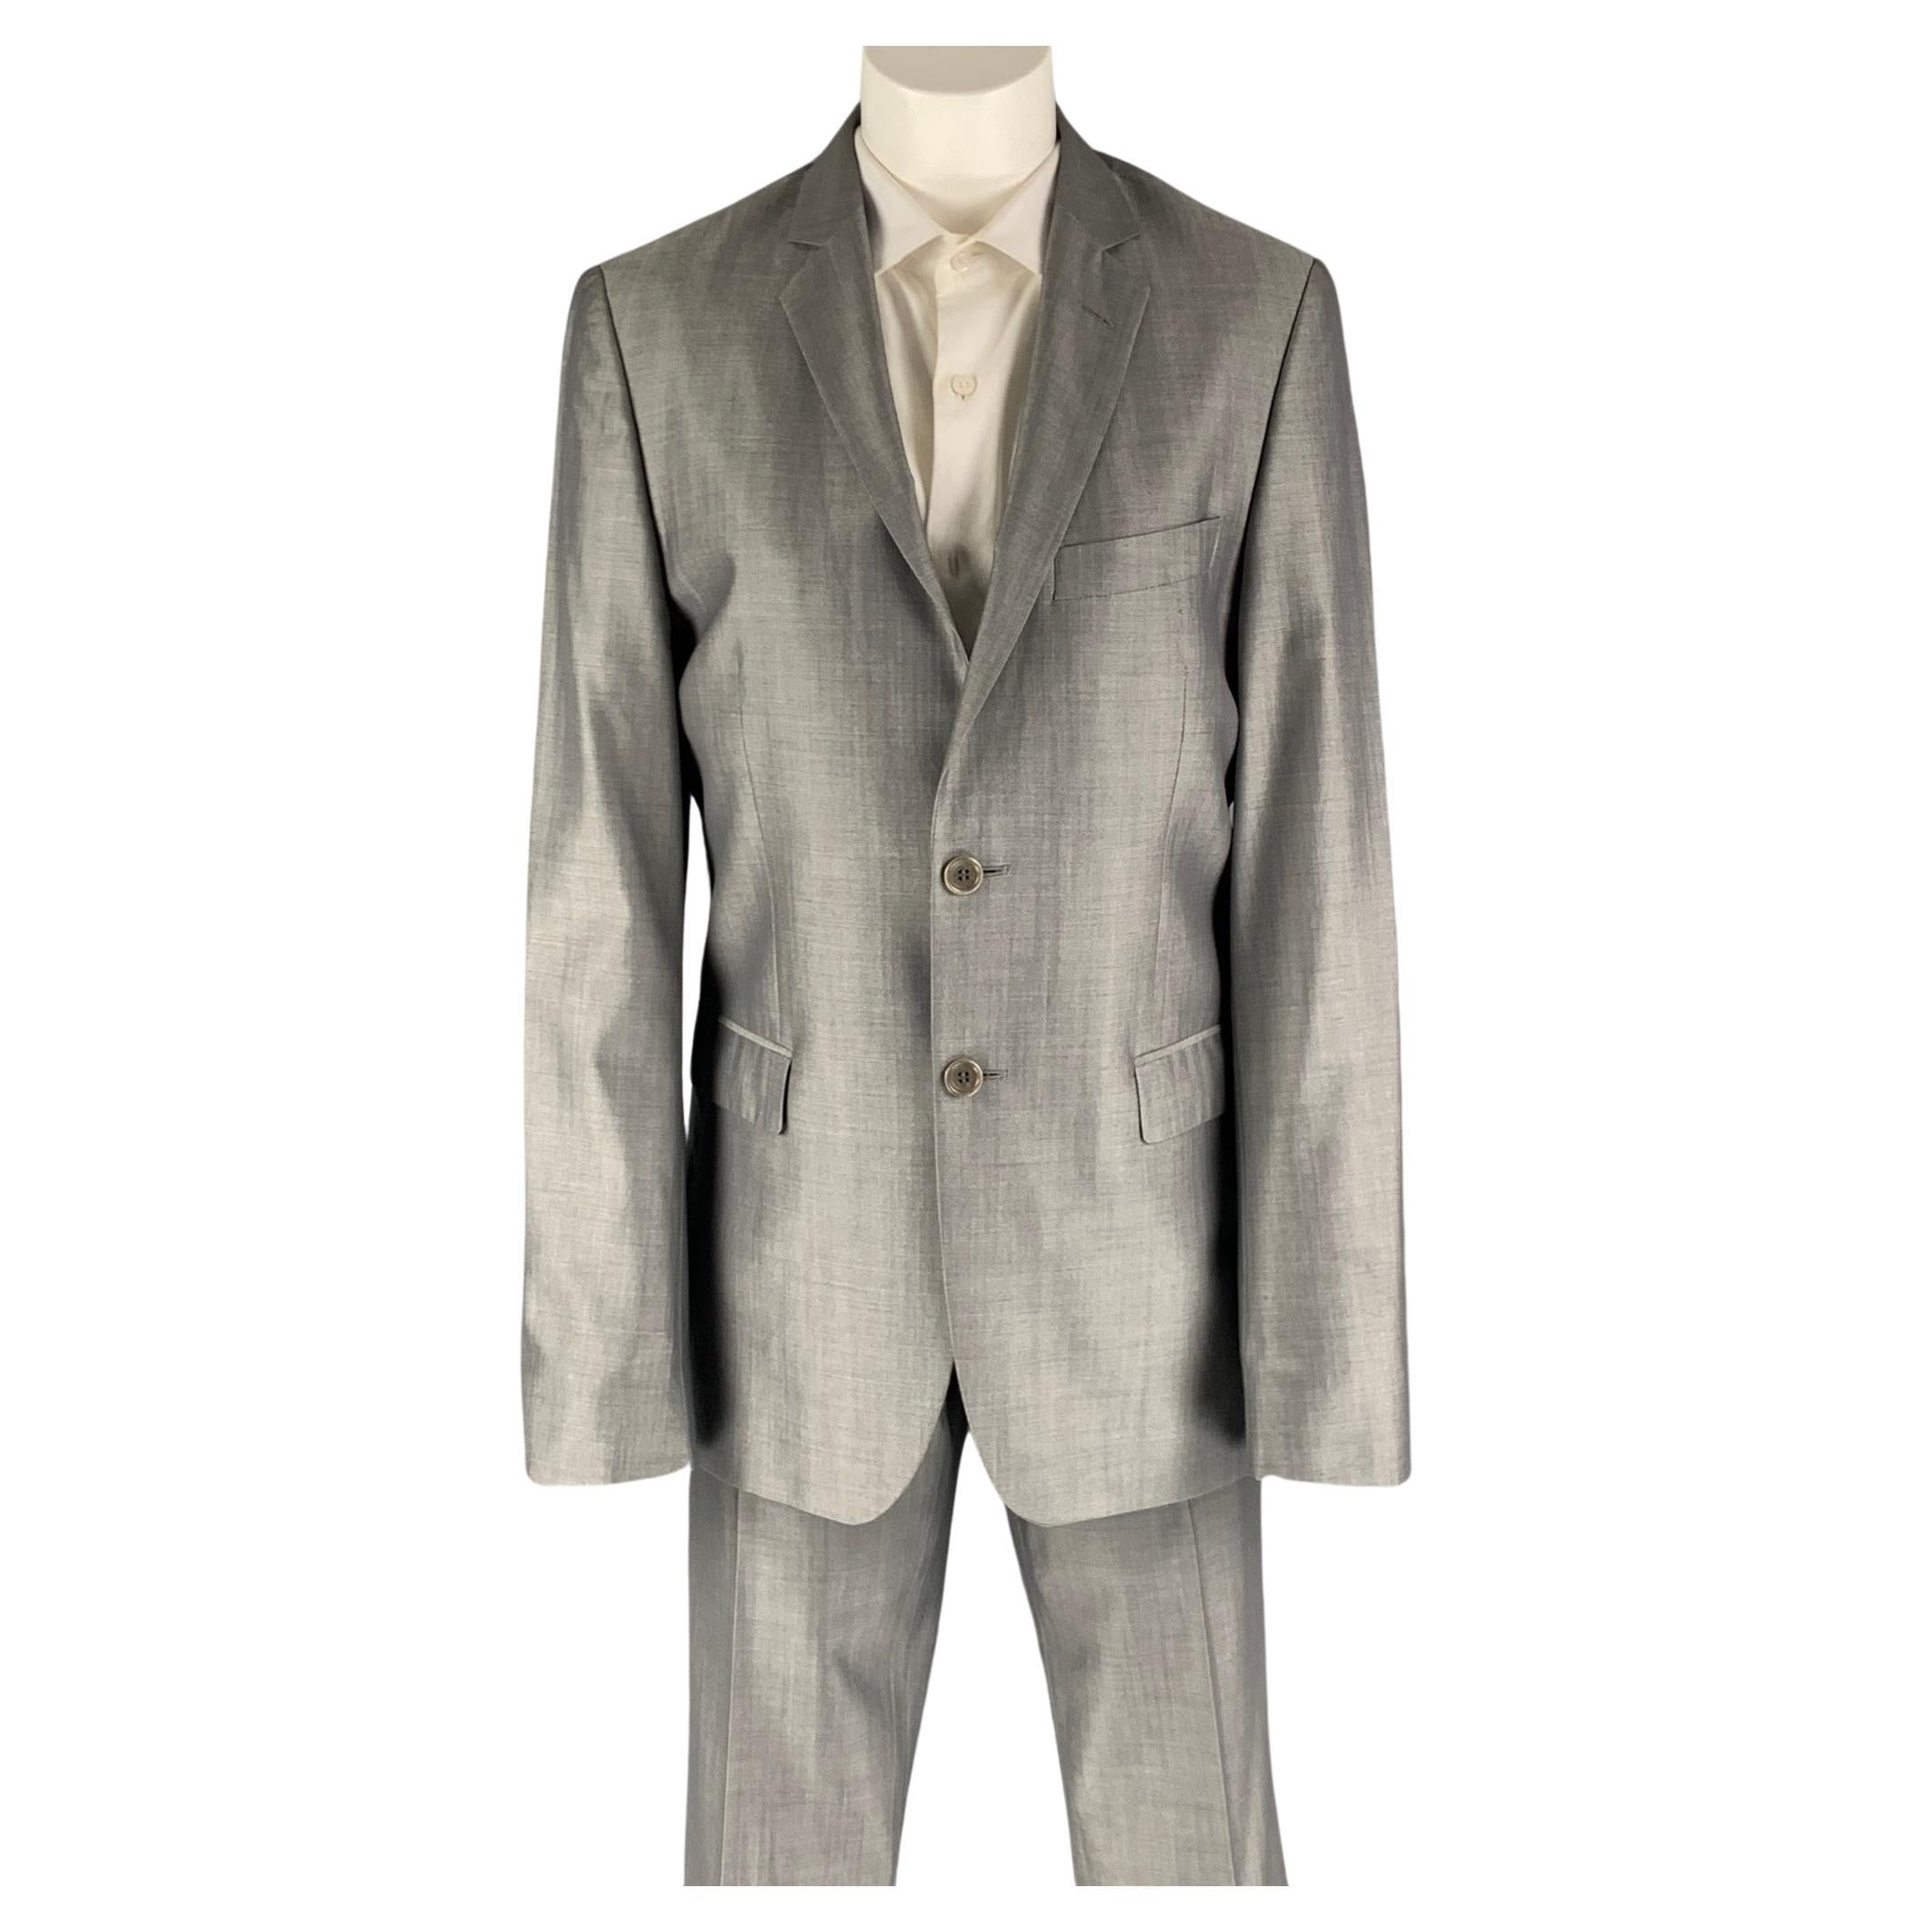 SPONTINI Size 36 Grey Shimmery Wool Silk Single Breasted 28 30 Suit